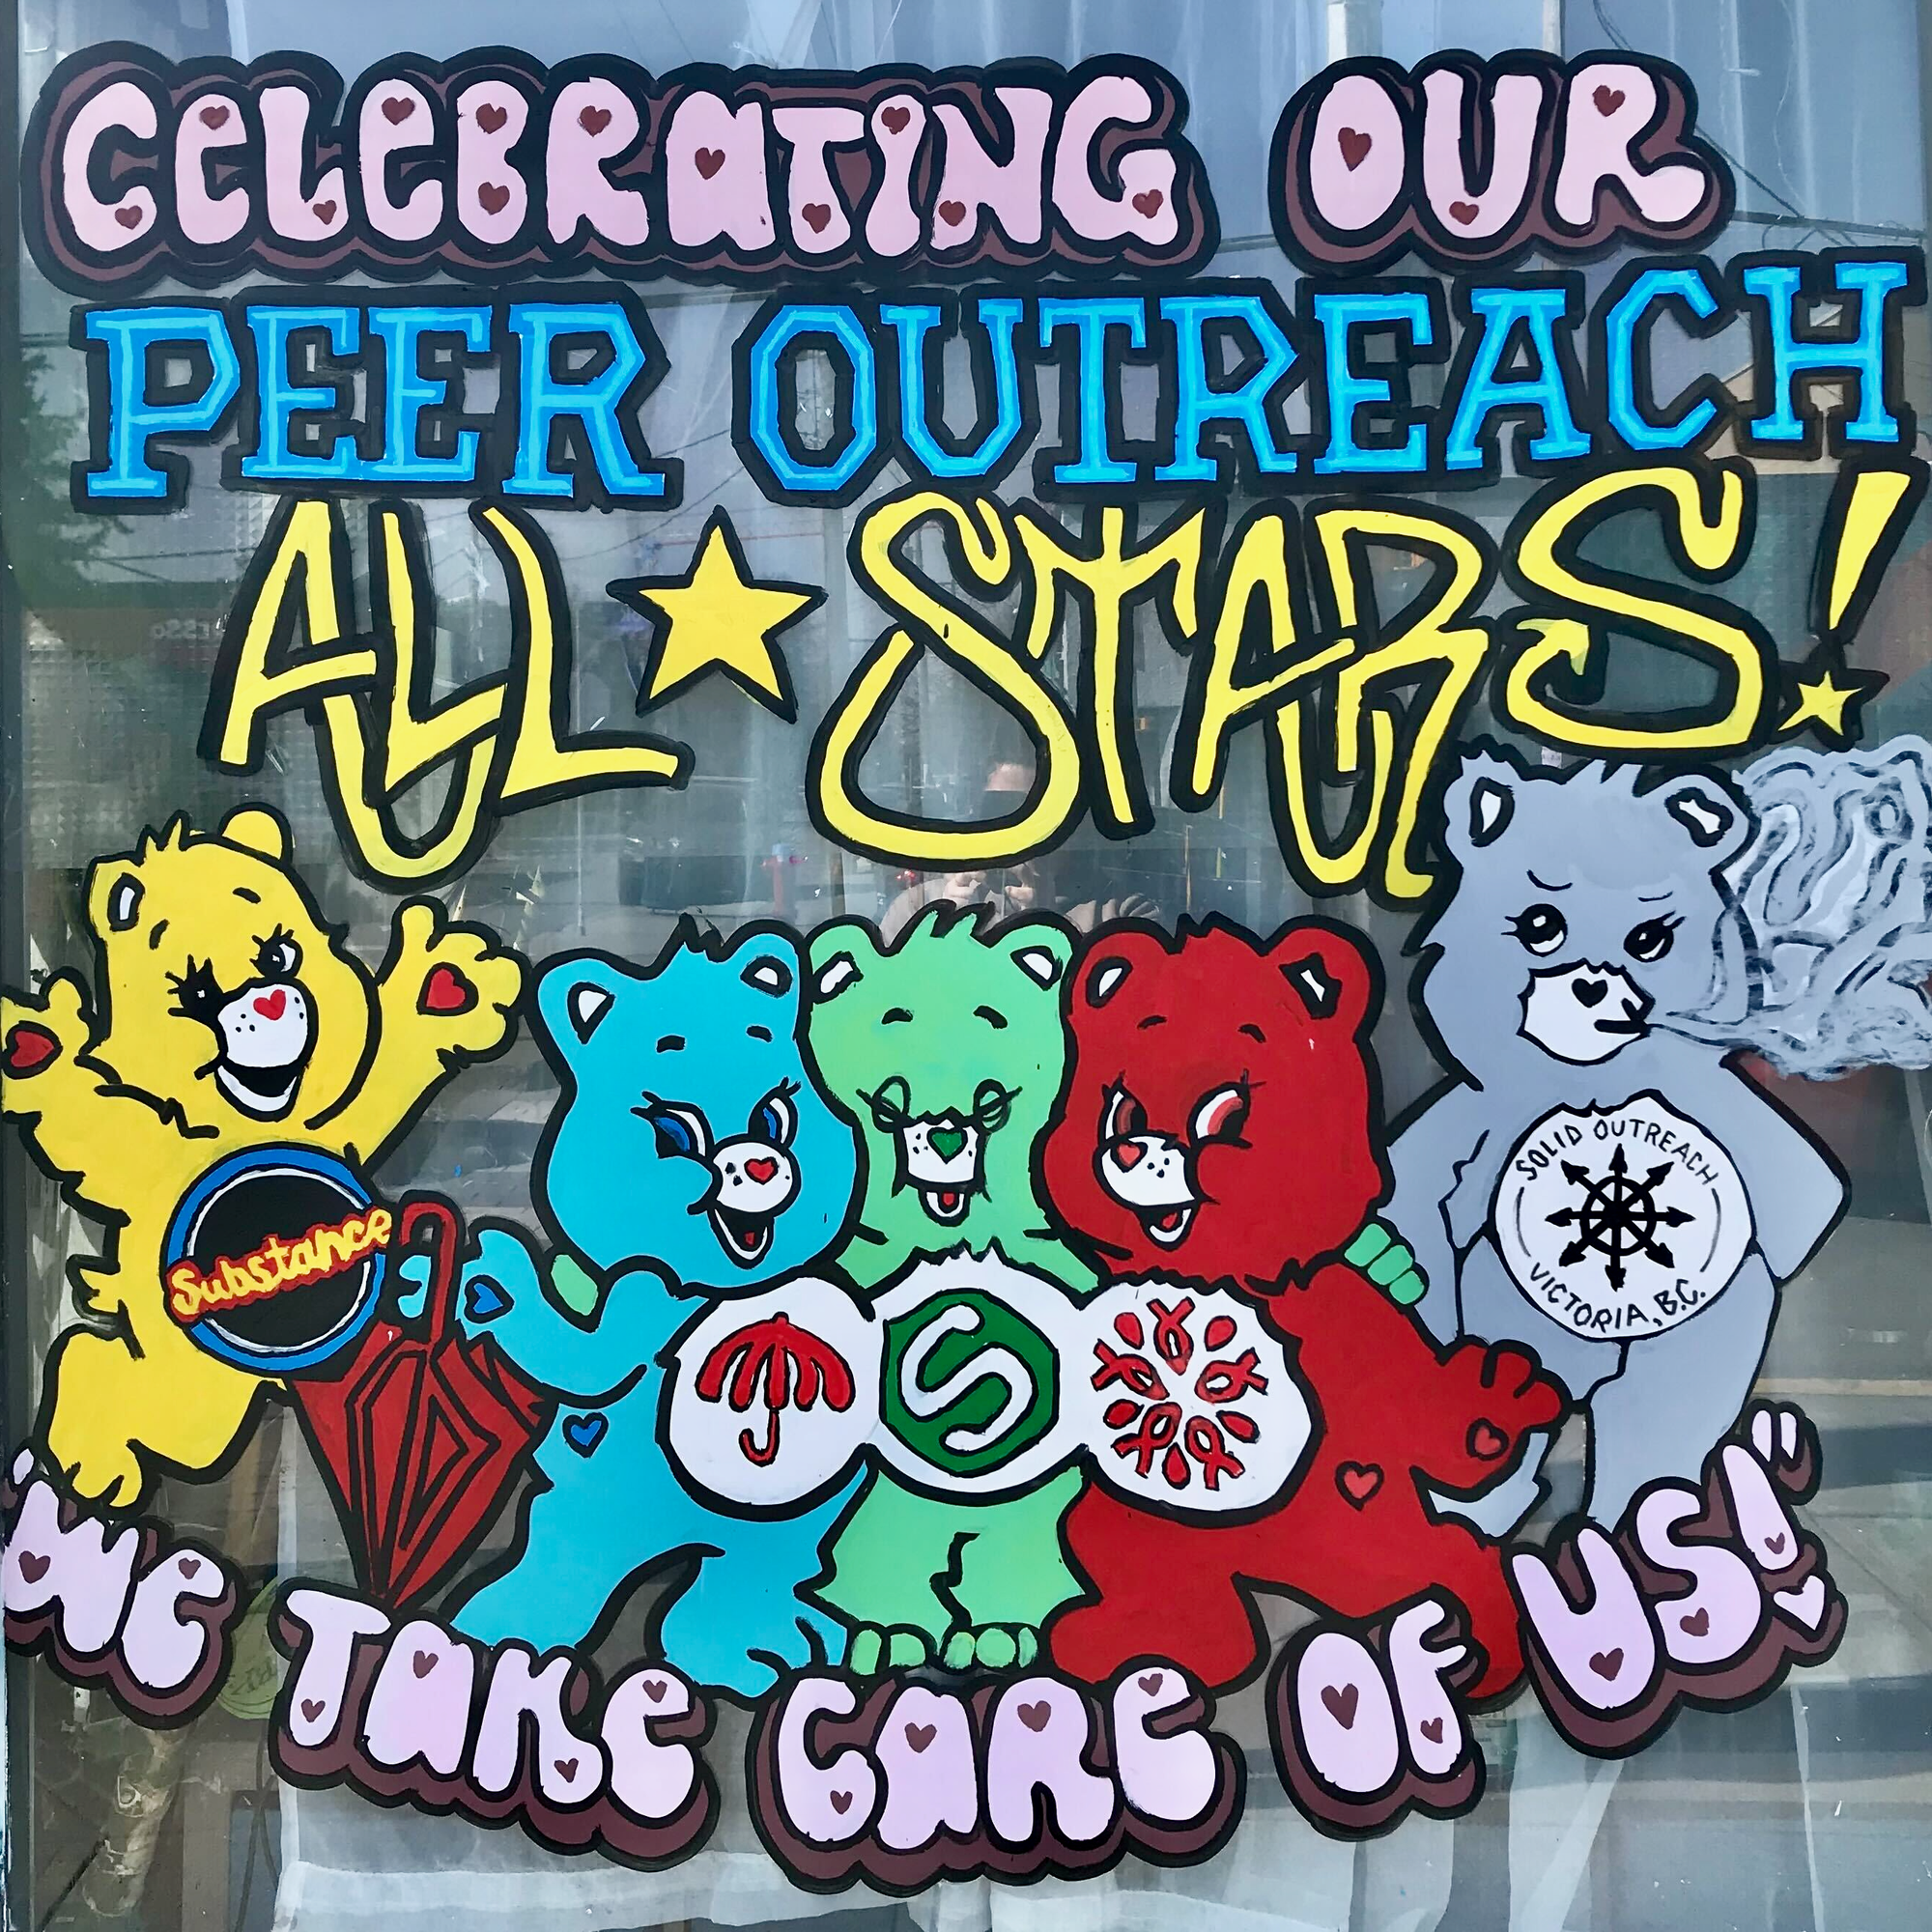 Substance window art by @darcie.dark representing Substance, Peers Victoria, SAFER, AVI, and SOLID as Care Bears.